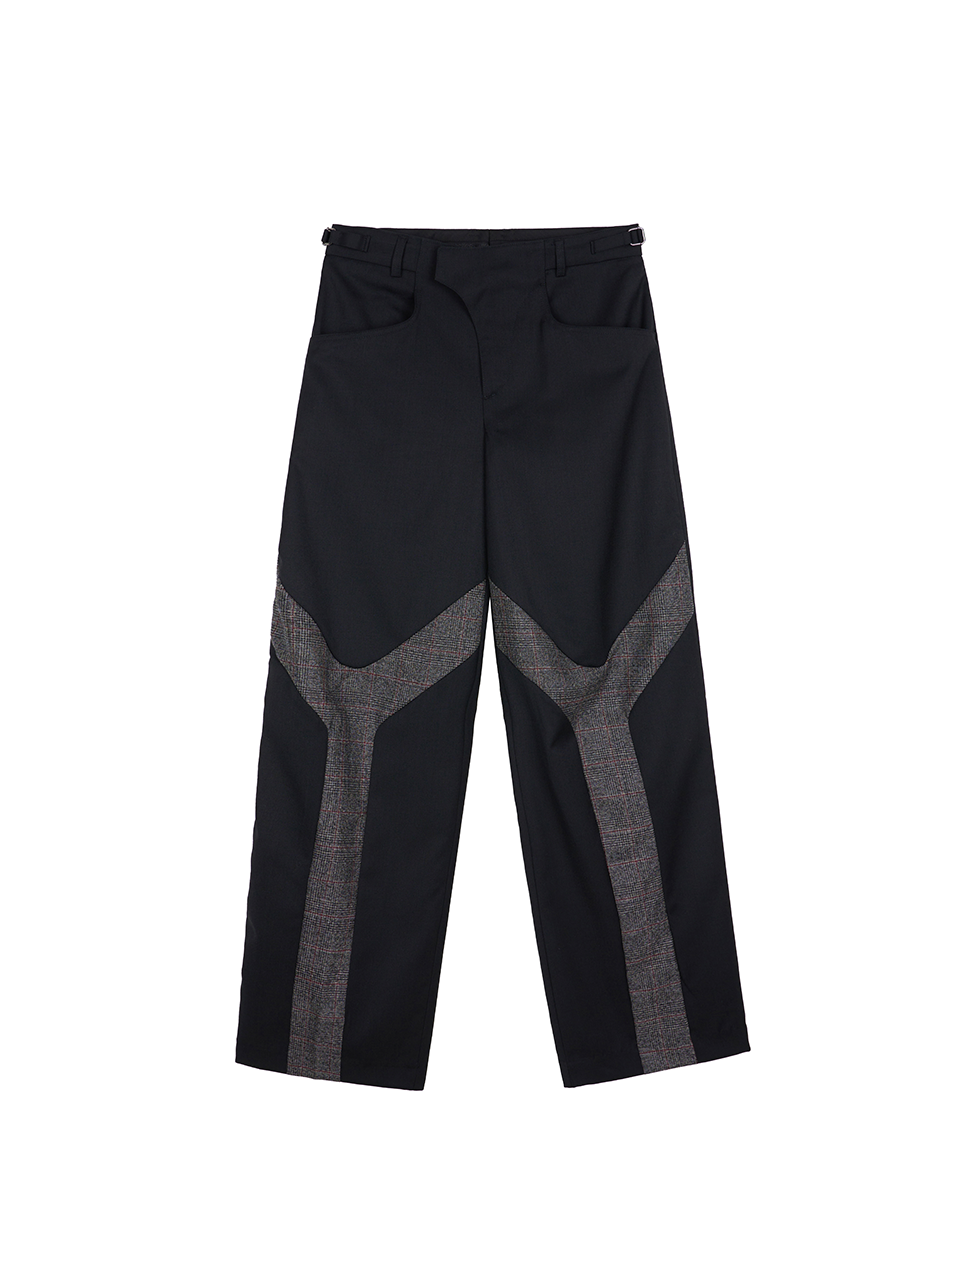 HELIX CLOTHING - 3 DIRECTION TROUSERS TYPE D (BLACK)